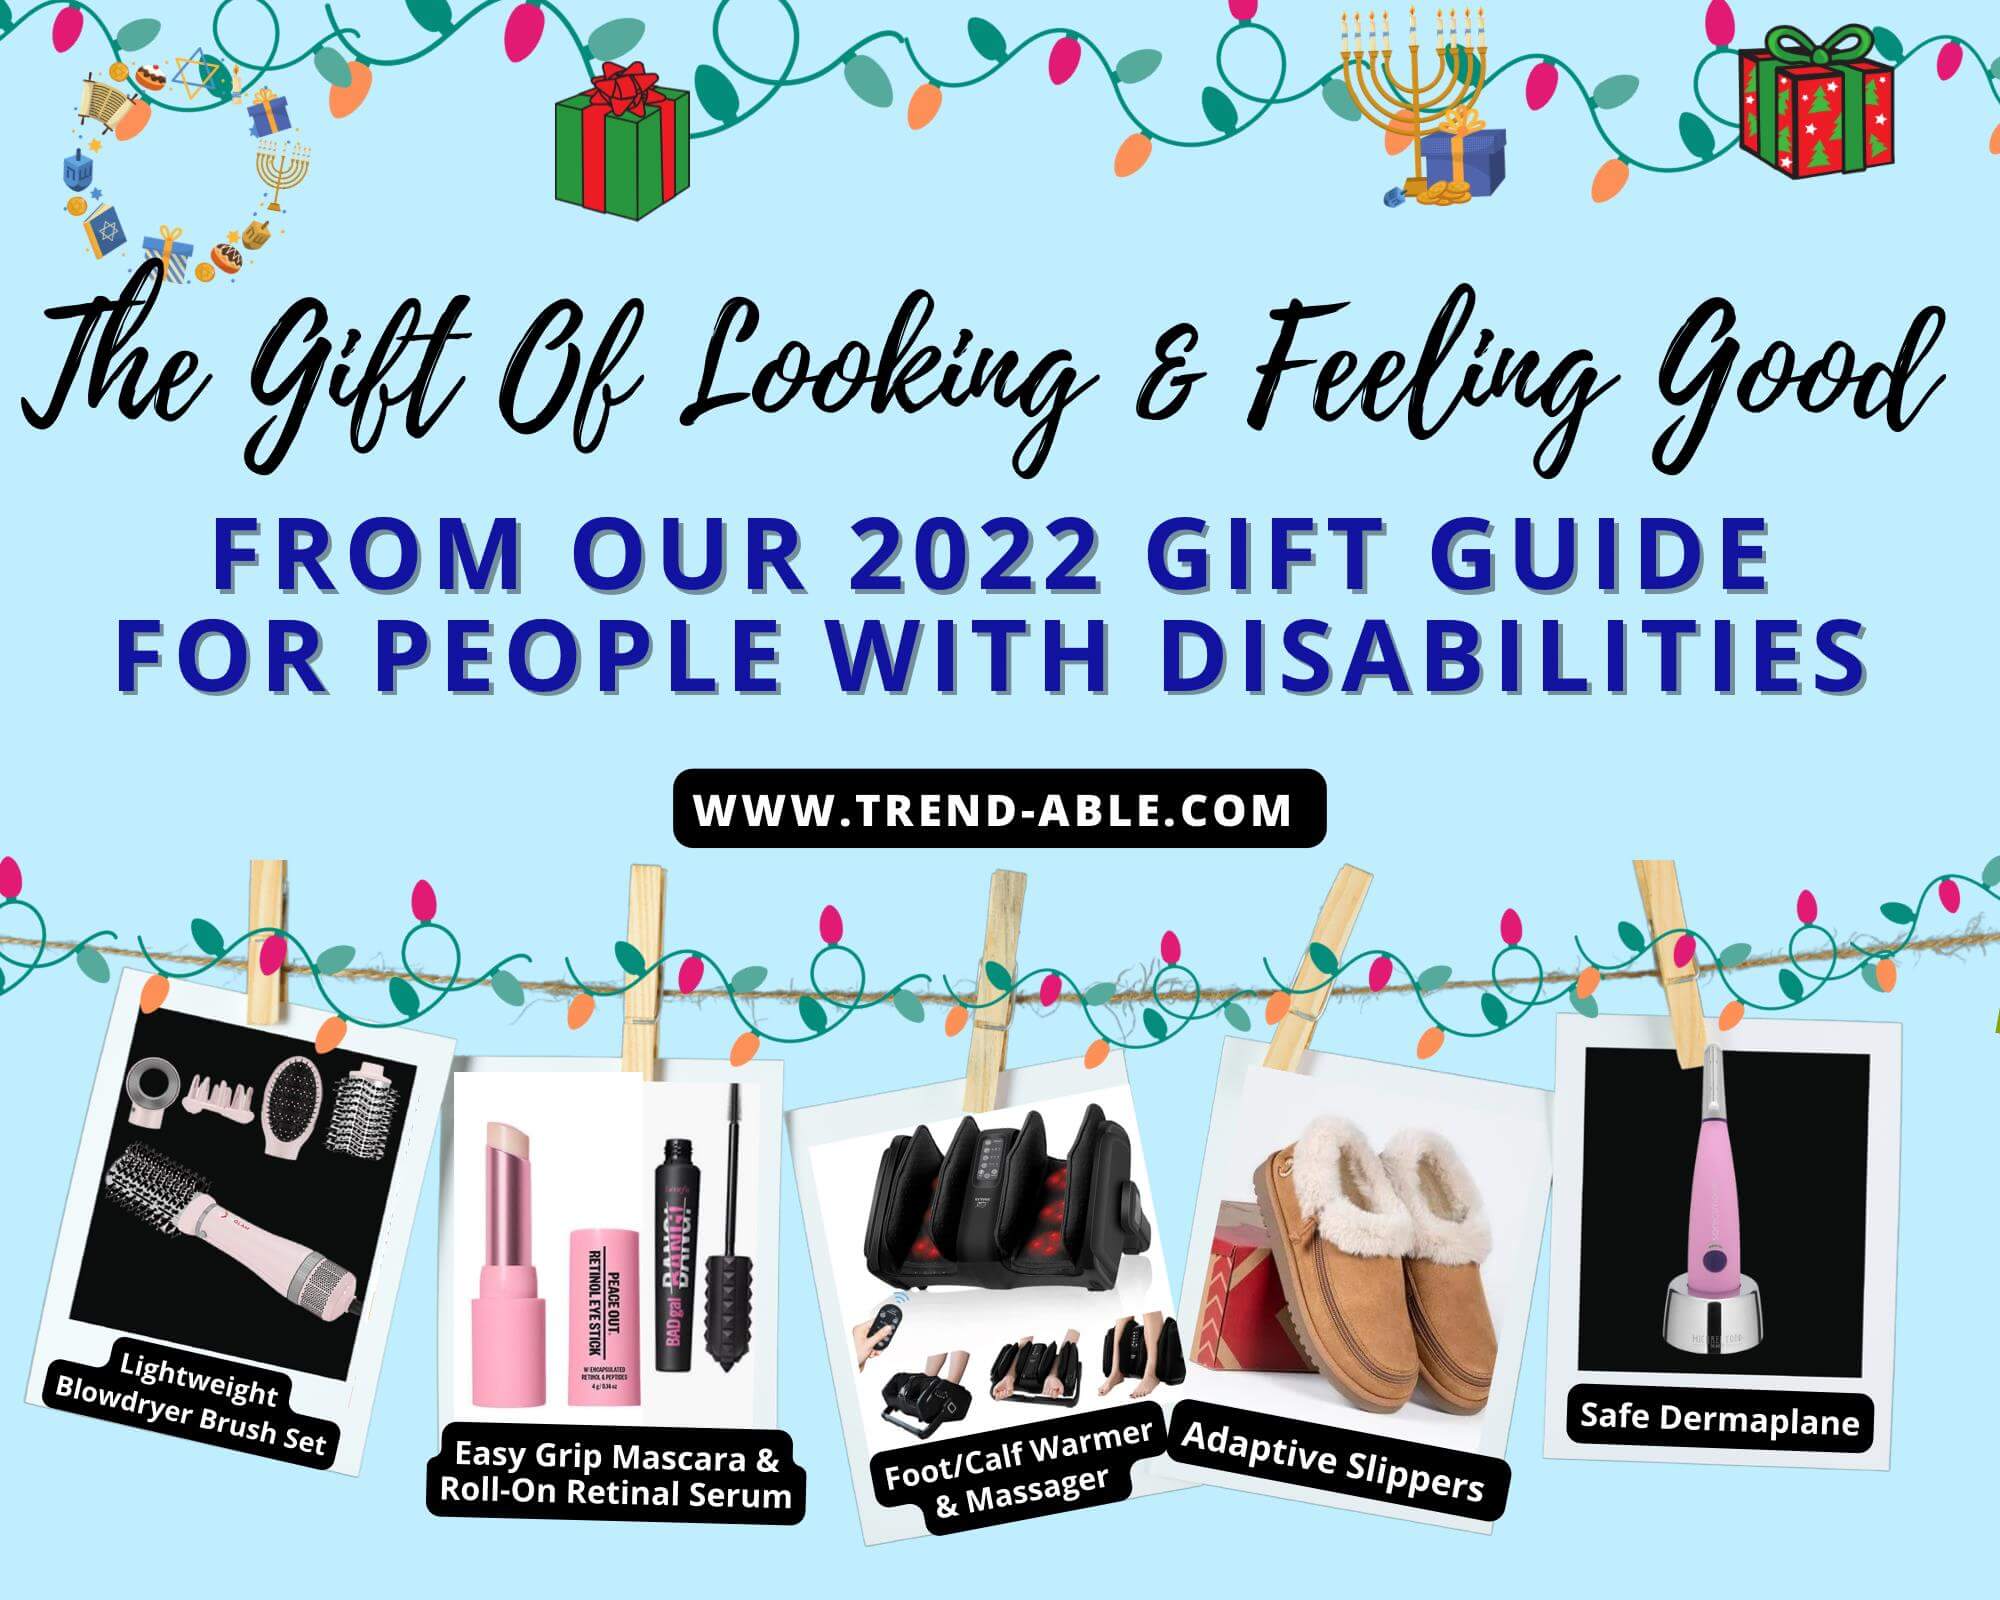 TREND-ABLE HOLIDAY GIFT GUIDE 2022